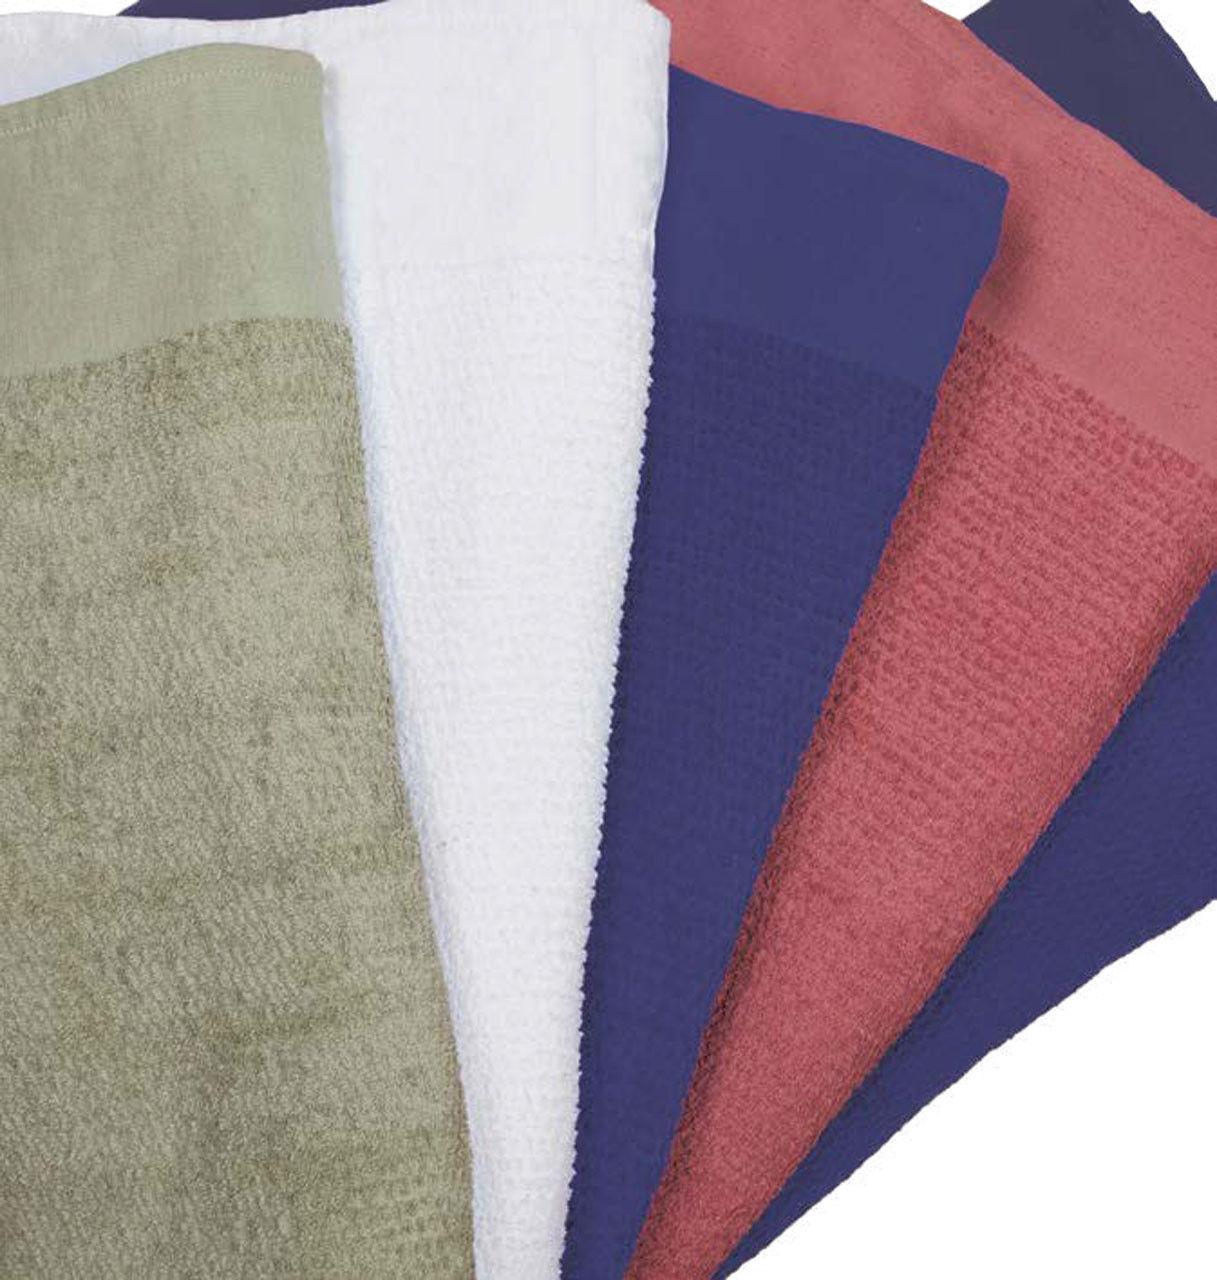 What materials compose the terry cloth blanket by Terry Hospital?